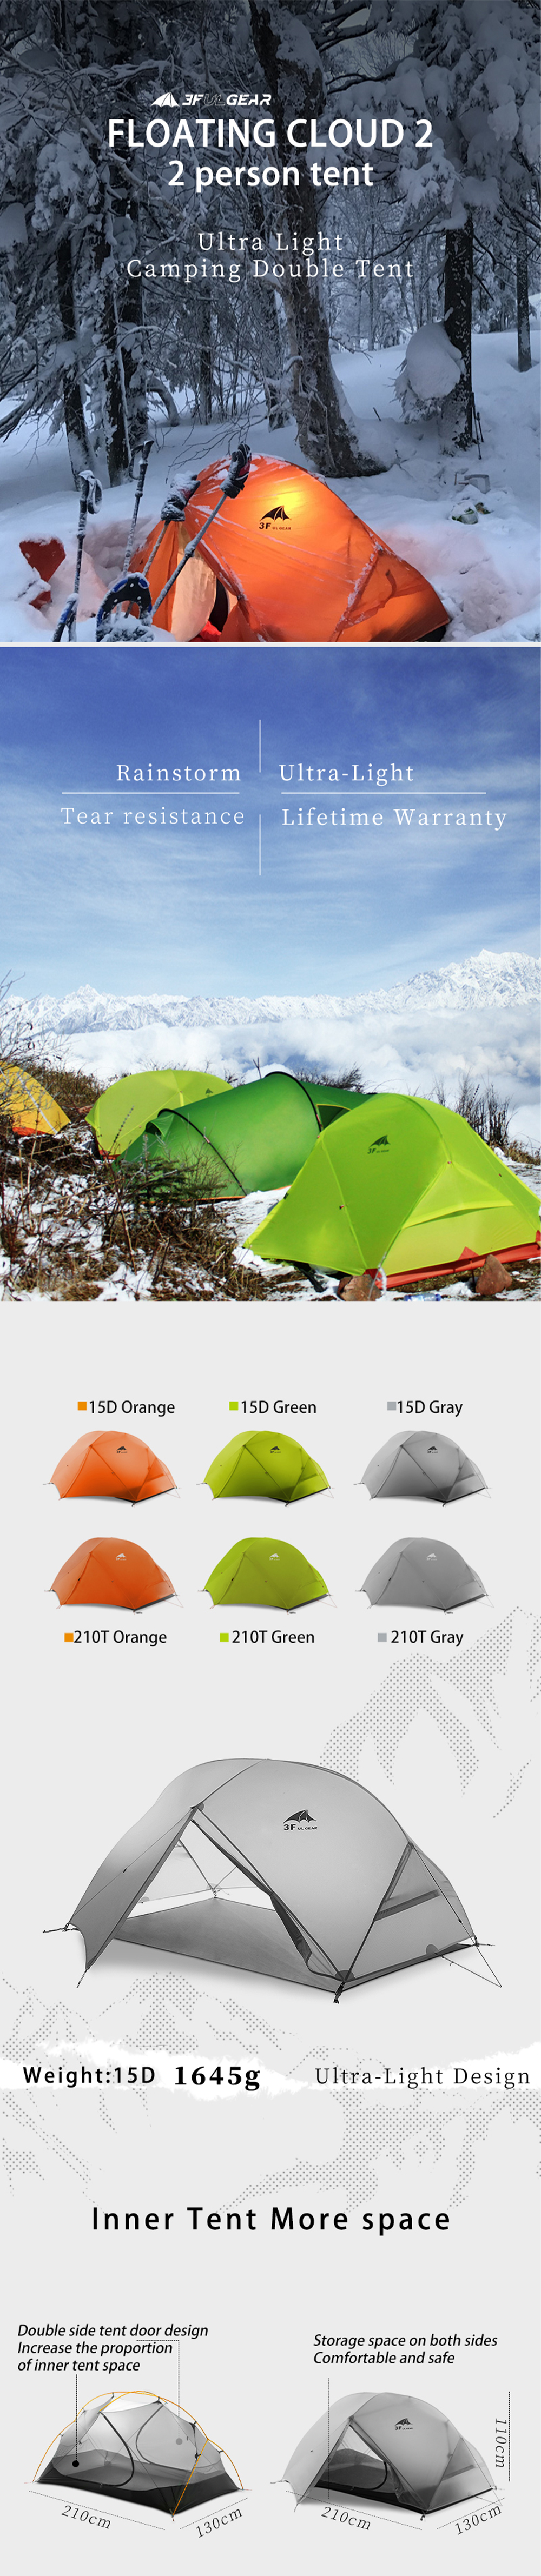 Cheap Goat Tents 3F UL GEAR 2 Person Camping Tent Ultralight 3 4 Season 15D Silicon Coated Nylon Outdoor Hiking Waterproof Tents With Free Mat